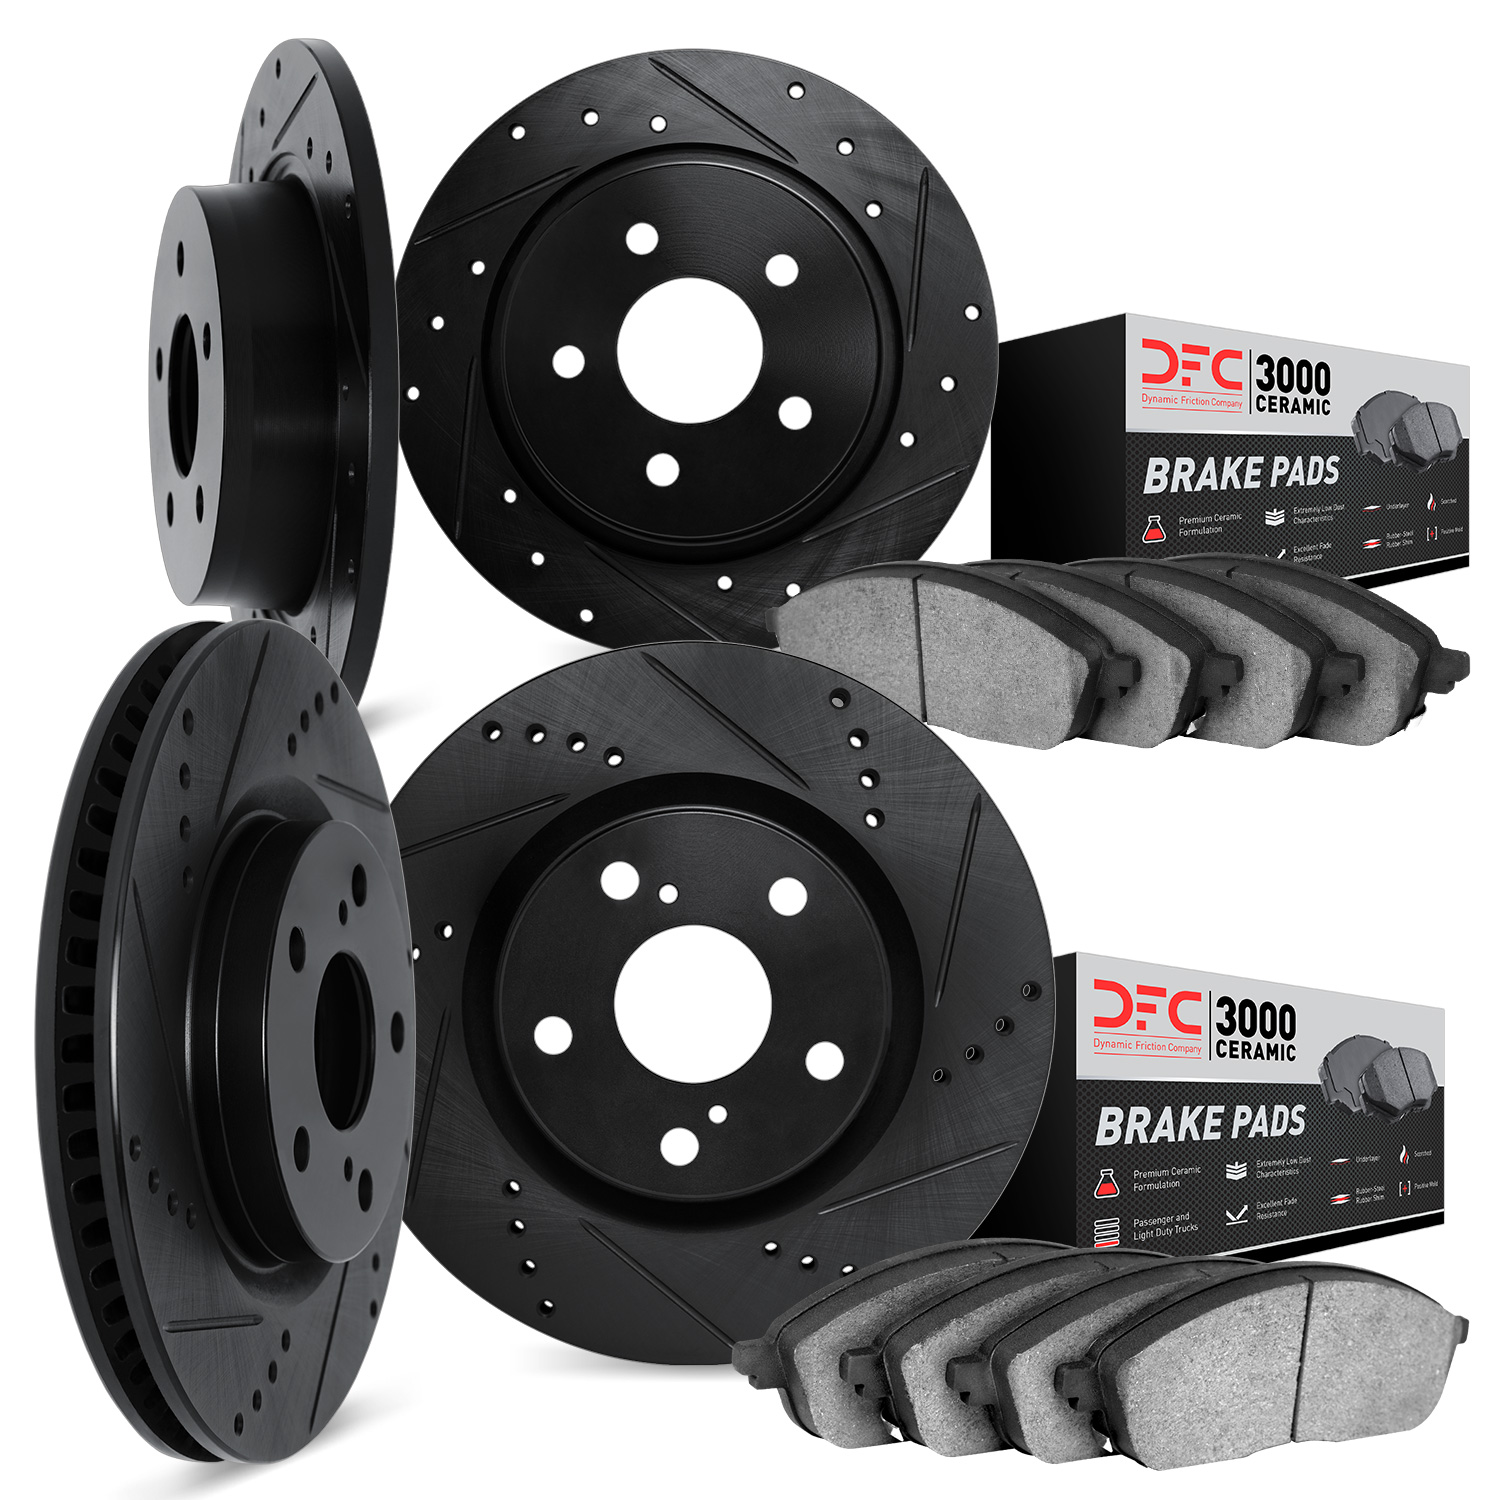 8304-59041 Drilled/Slotted Brake Rotors with 3000-Series Ceramic Brake Pads Kit [Black], 2008-2012 Acura/Honda, Position: Front